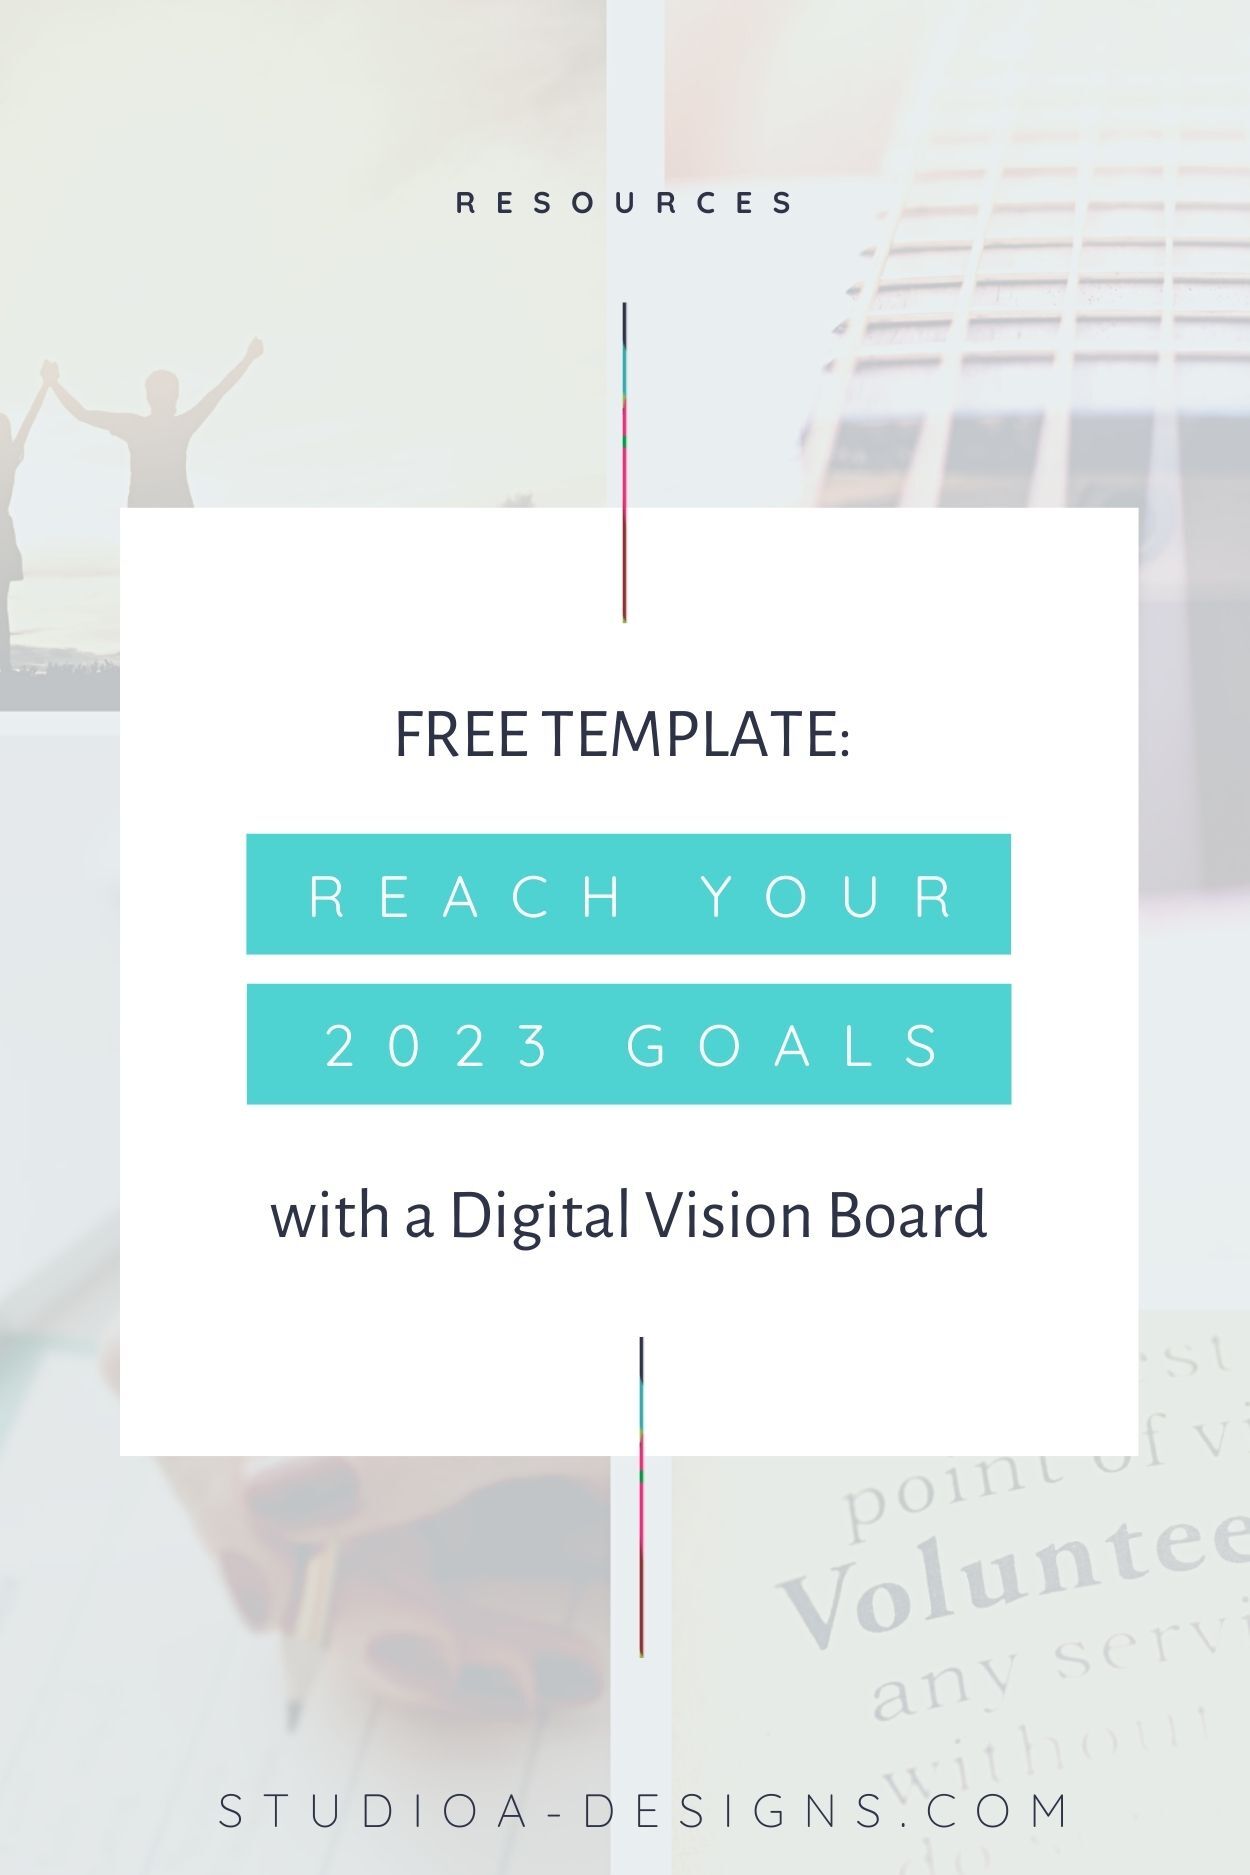 Free Template: Reach Your 2023 Goals With A Digital Vision Board